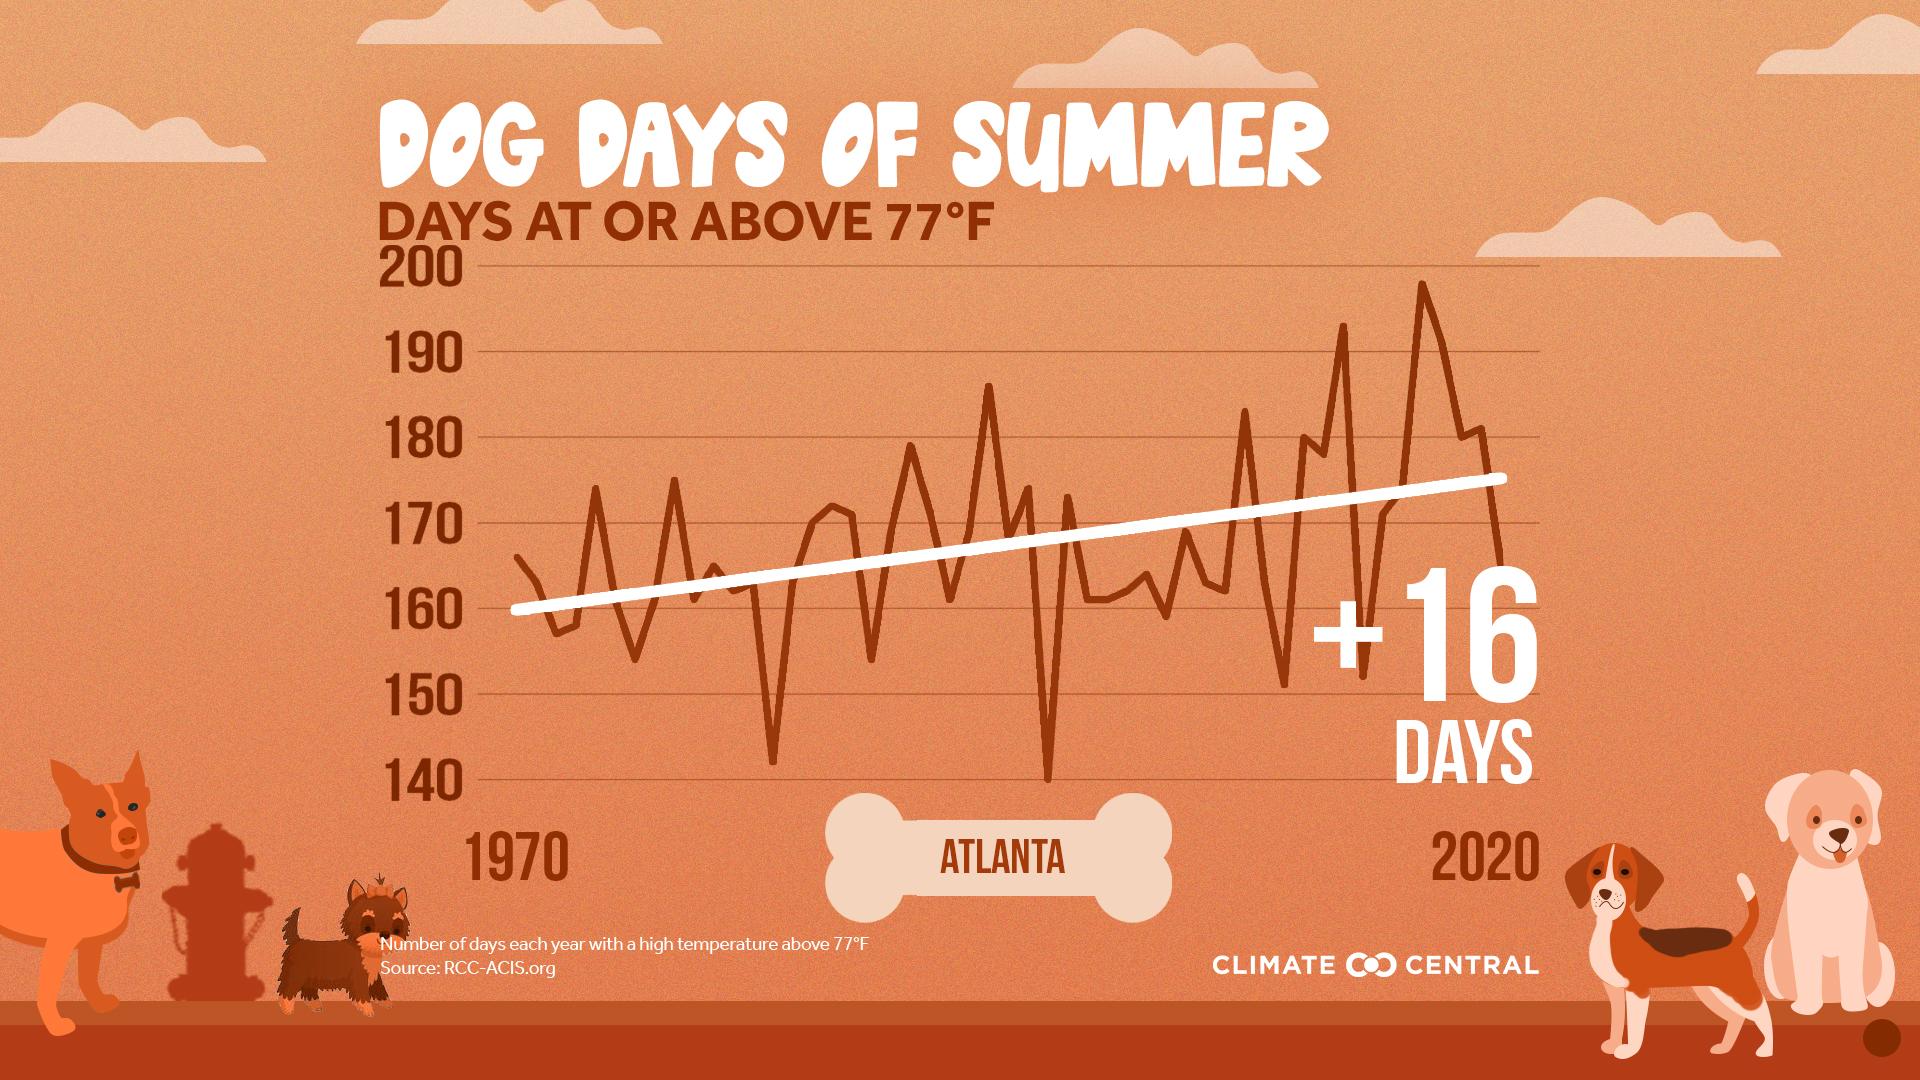 Days Above 77°F - Dog Days of Summer: When Heat Endangers Pets